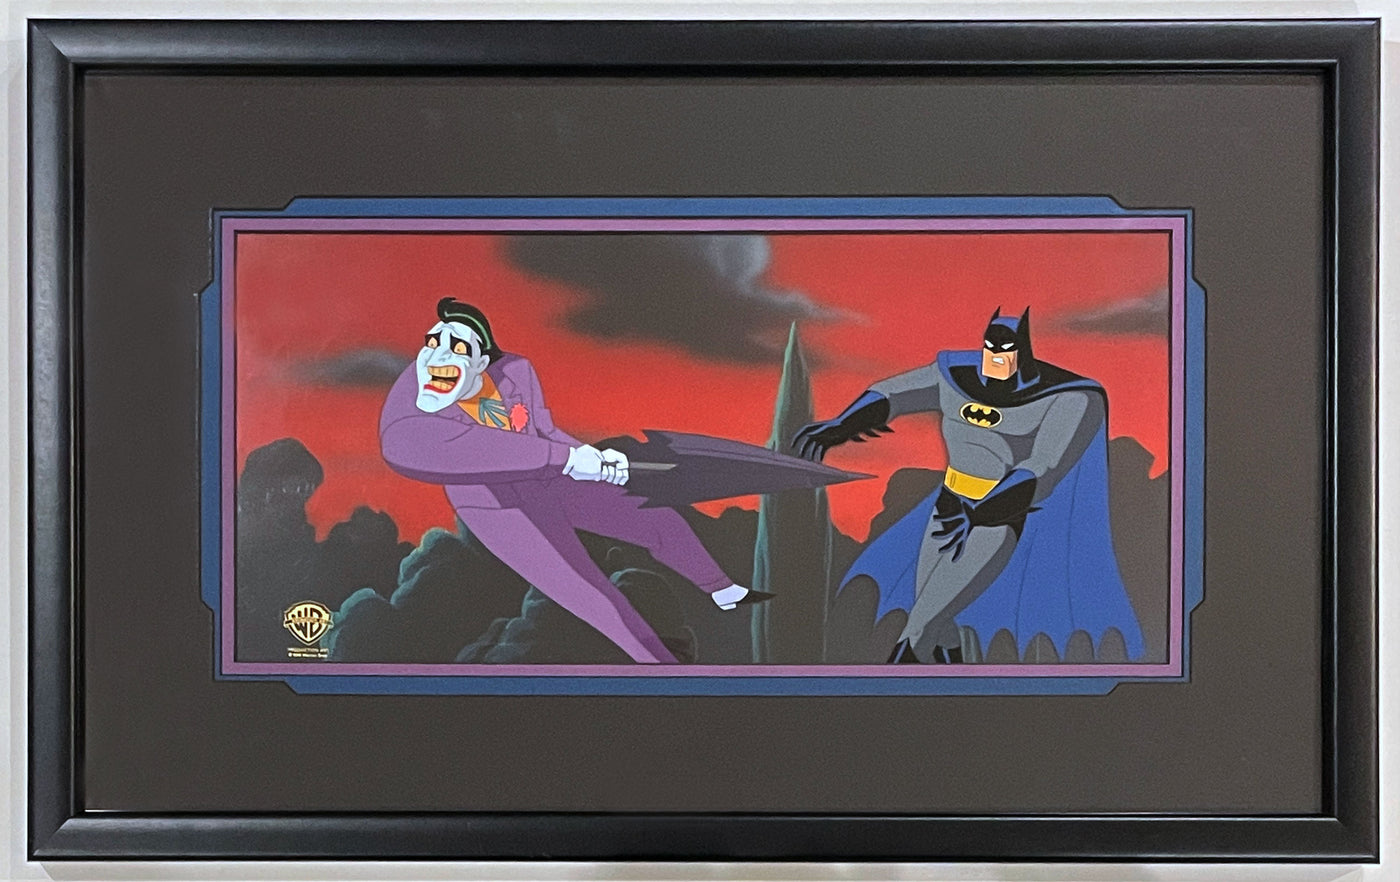 Original WB Production Cel "Harlequinade" from The Adventures of Batman and Robin featuring Batman and The Joker